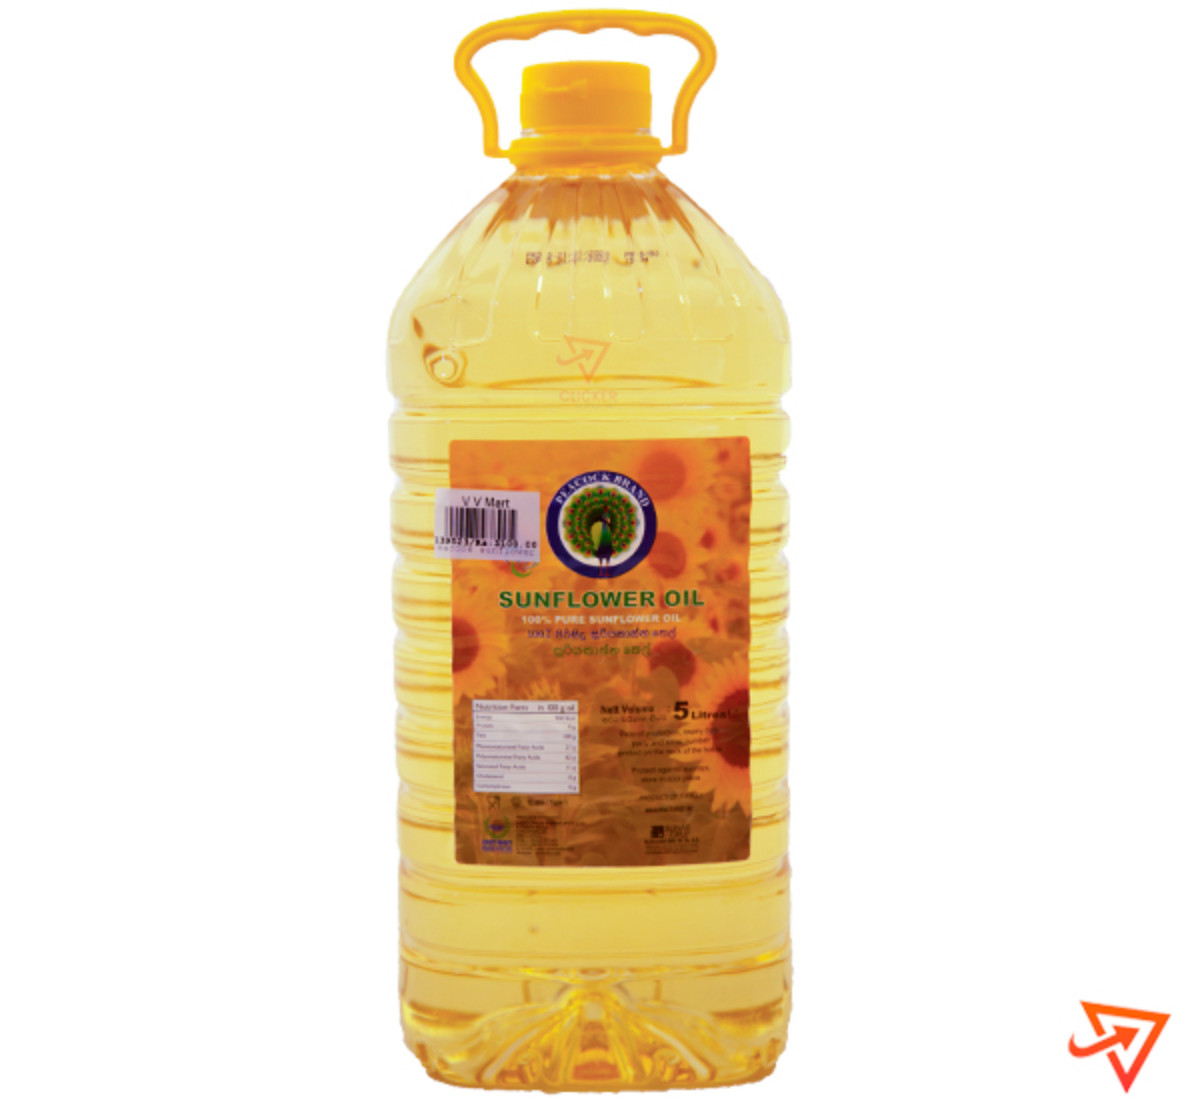 Clicker product 5L PEACOCK brand sunflower oil 881